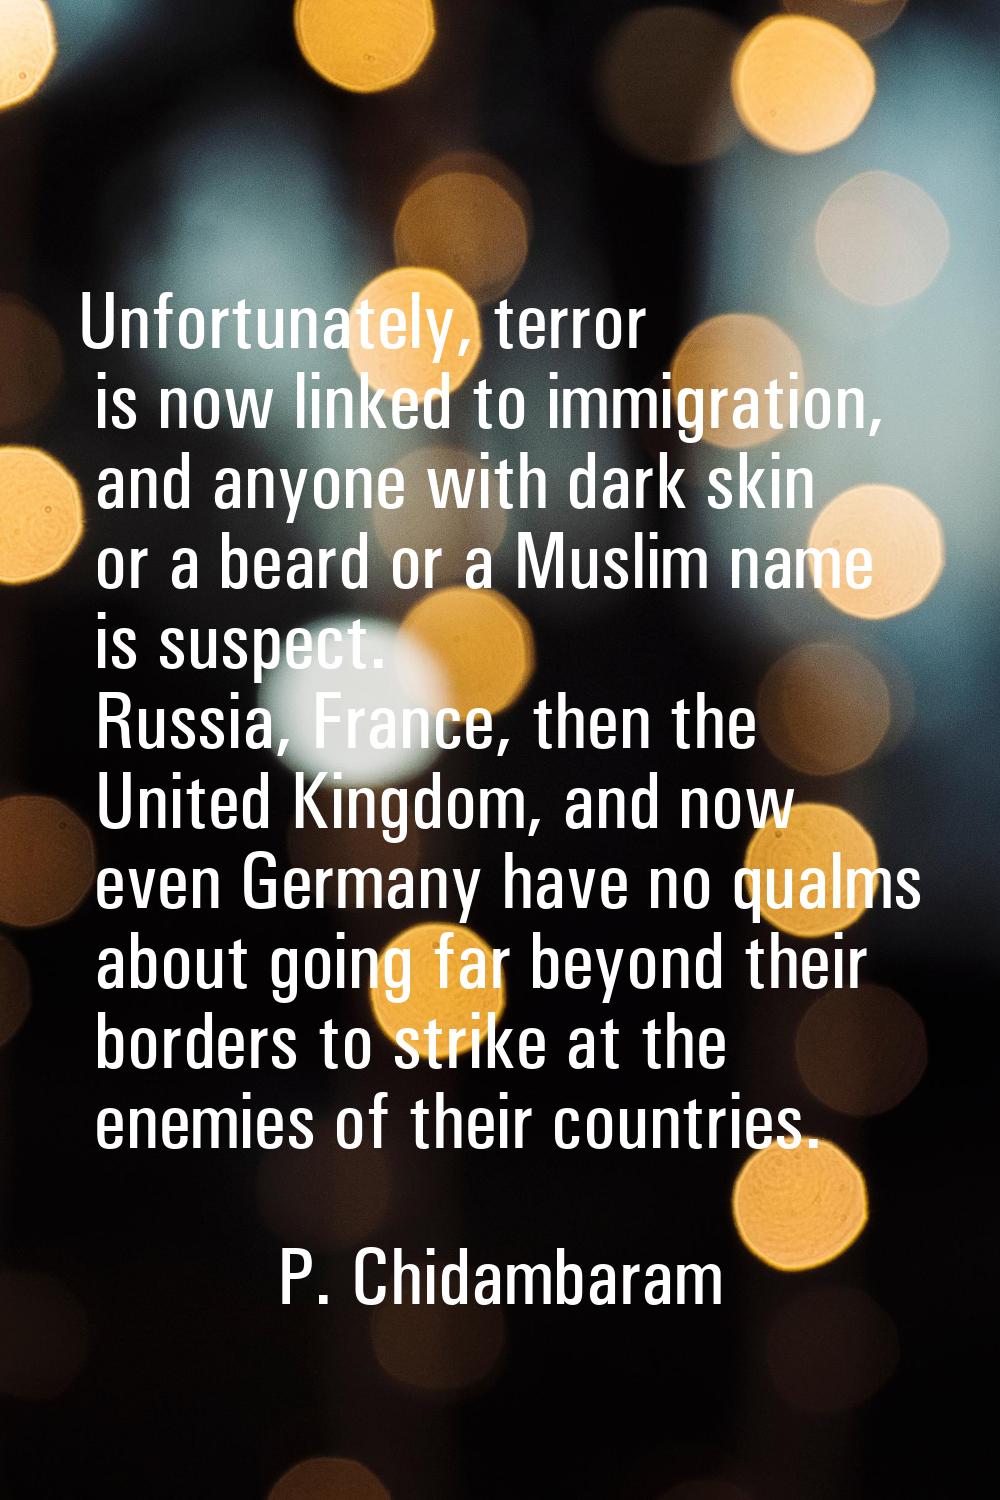 Unfortunately, terror is now linked to immigration, and anyone with dark skin or a beard or a Musli